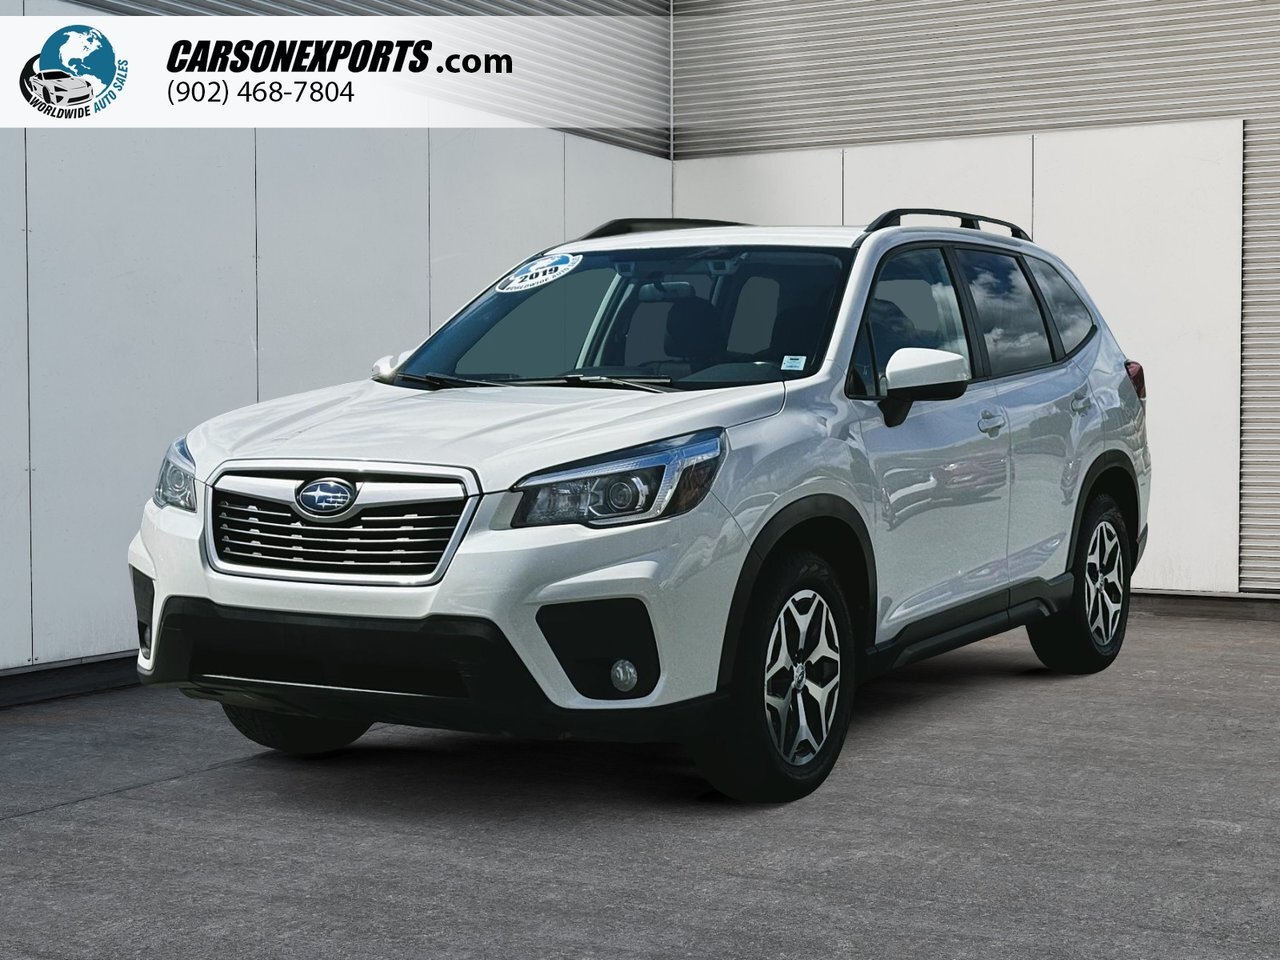 2019 Subaru Forester 2.5i Touring The best place to buy a used car. Per